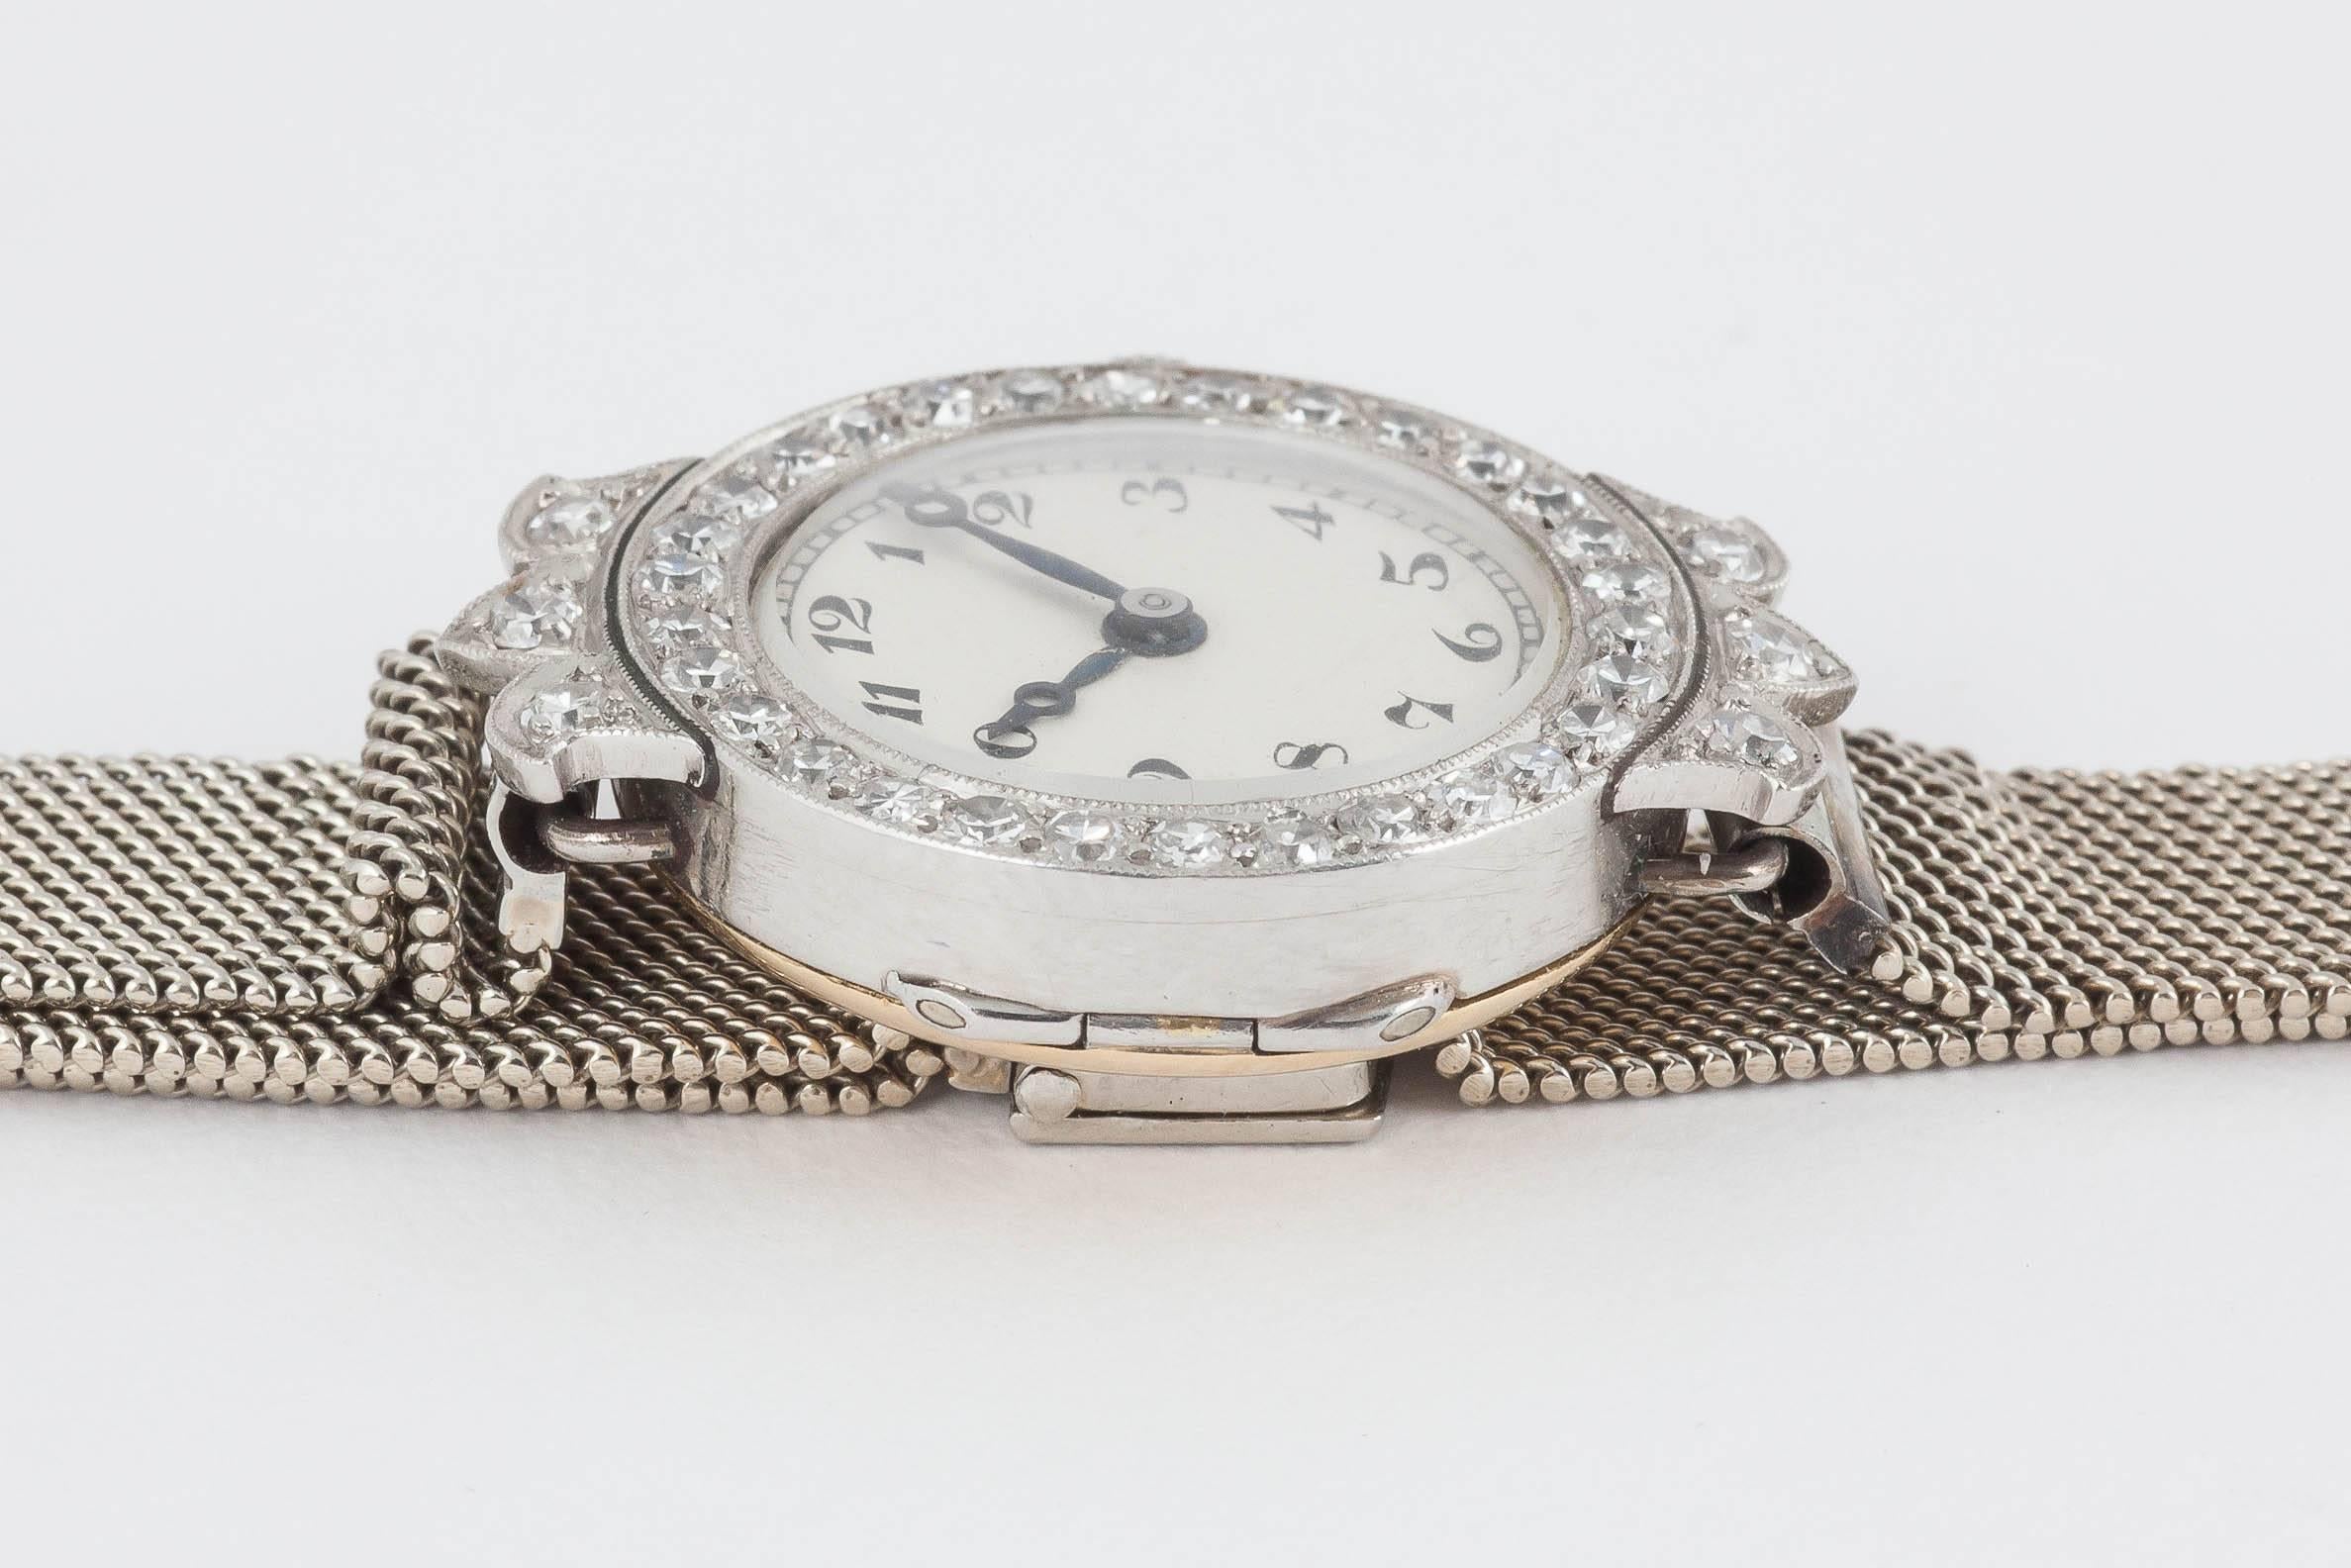 A fine quality diamond set ladies evening watch mounted in 18ct white and yellow gold, signed Goldsmiths and Silversmiths [Garrard Regent Street, London], ruby jewelled Swiss lever movement, diamond set surround and shoulders, on a Milanese